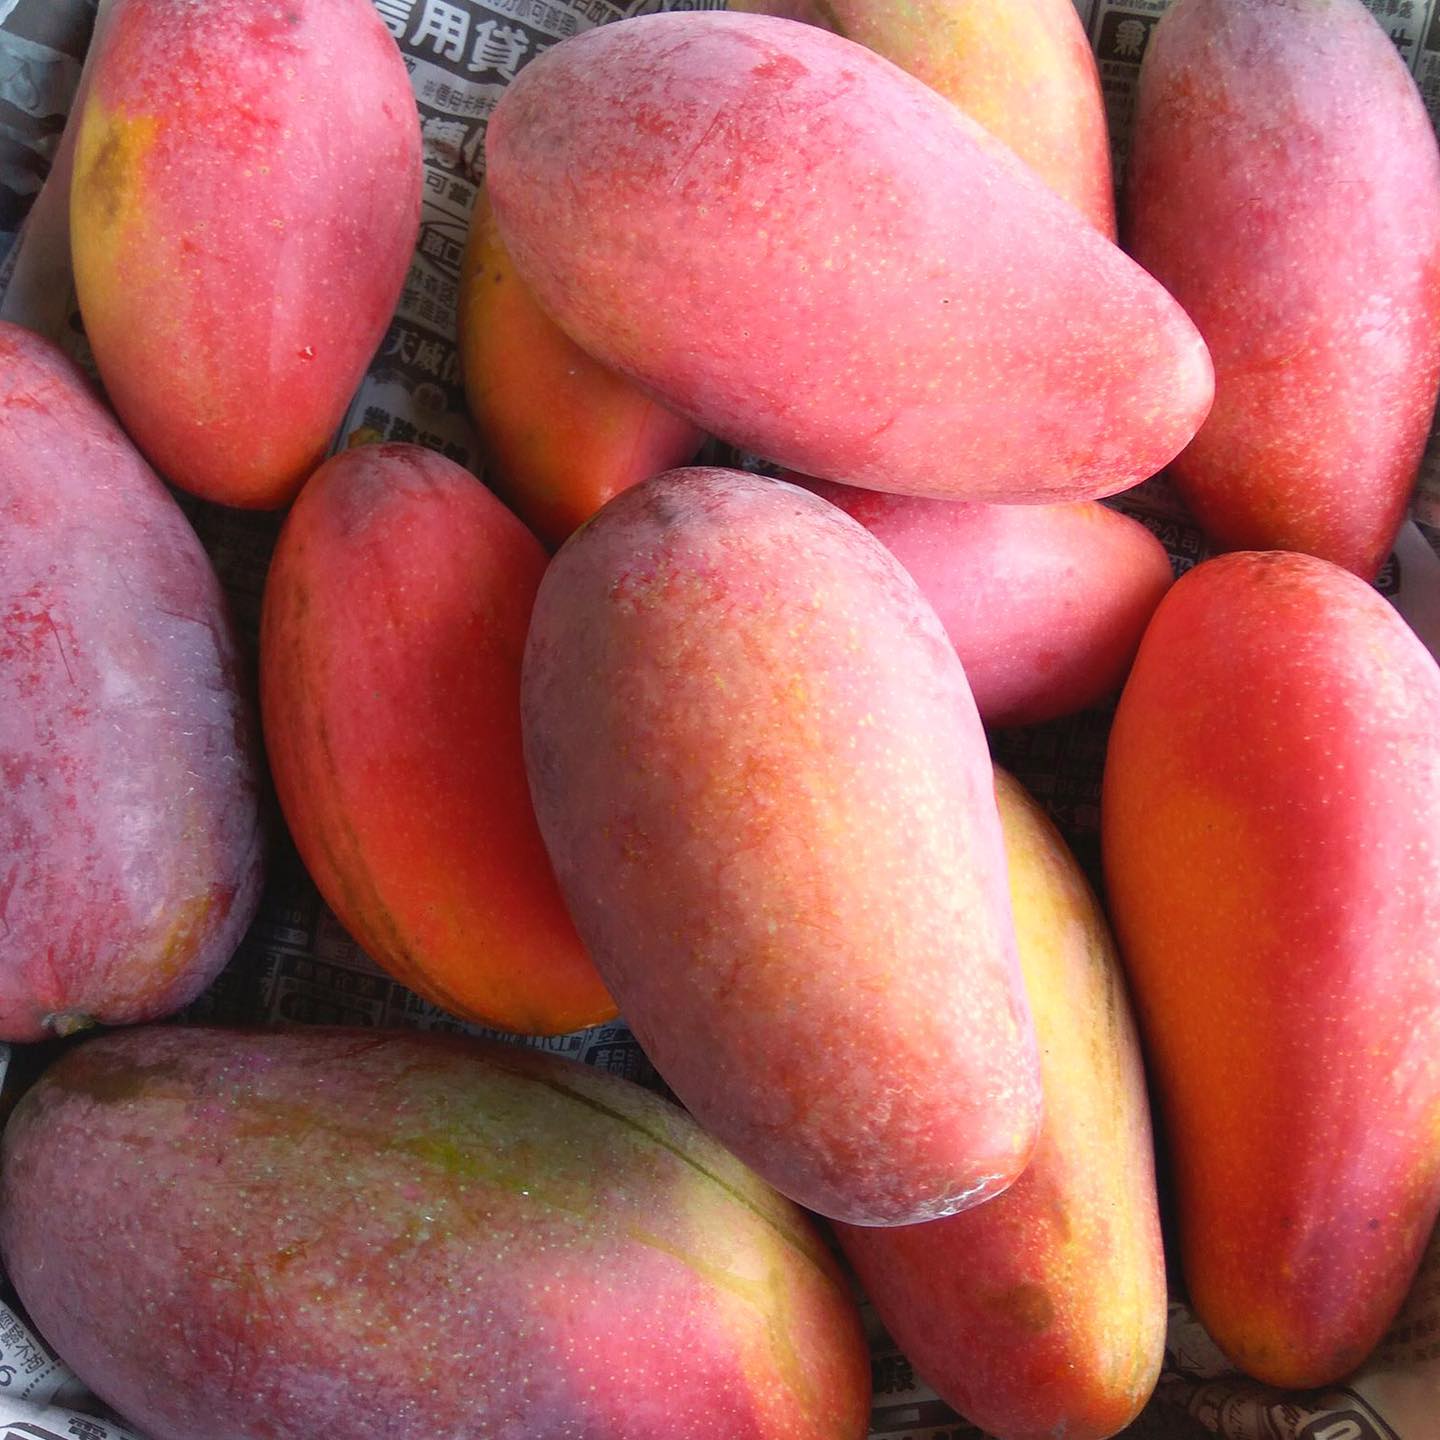 Look at these lovely mango babies🥭🥰Who can resist eating it😍😍?